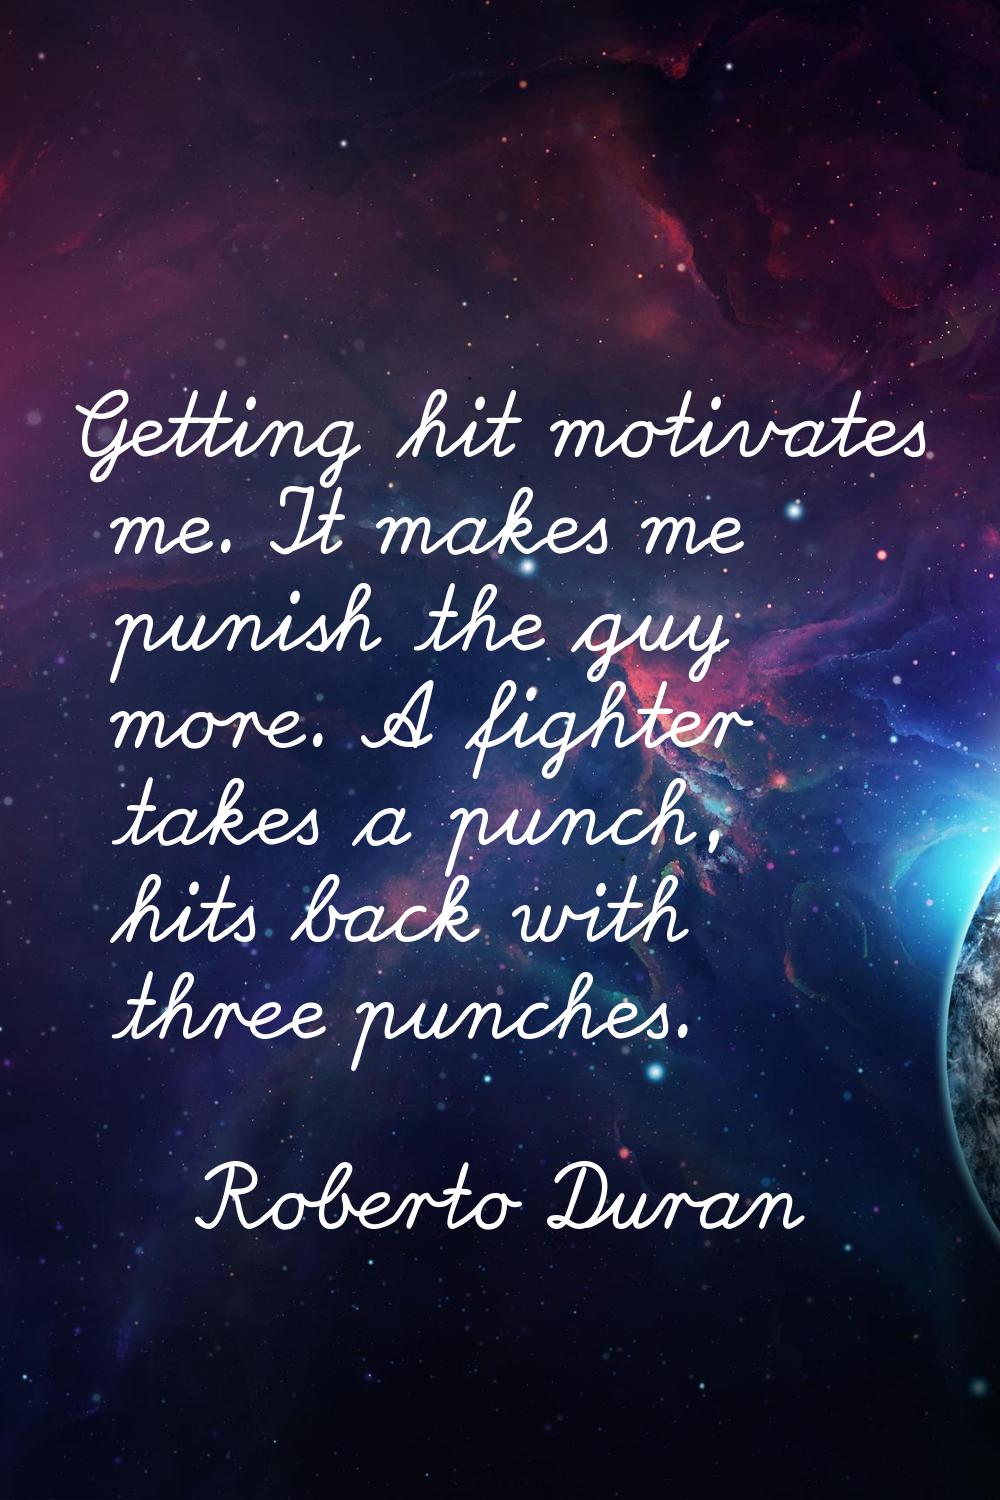 Getting hit motivates me. It makes me punish the guy more. A fighter takes a punch, hits back with 